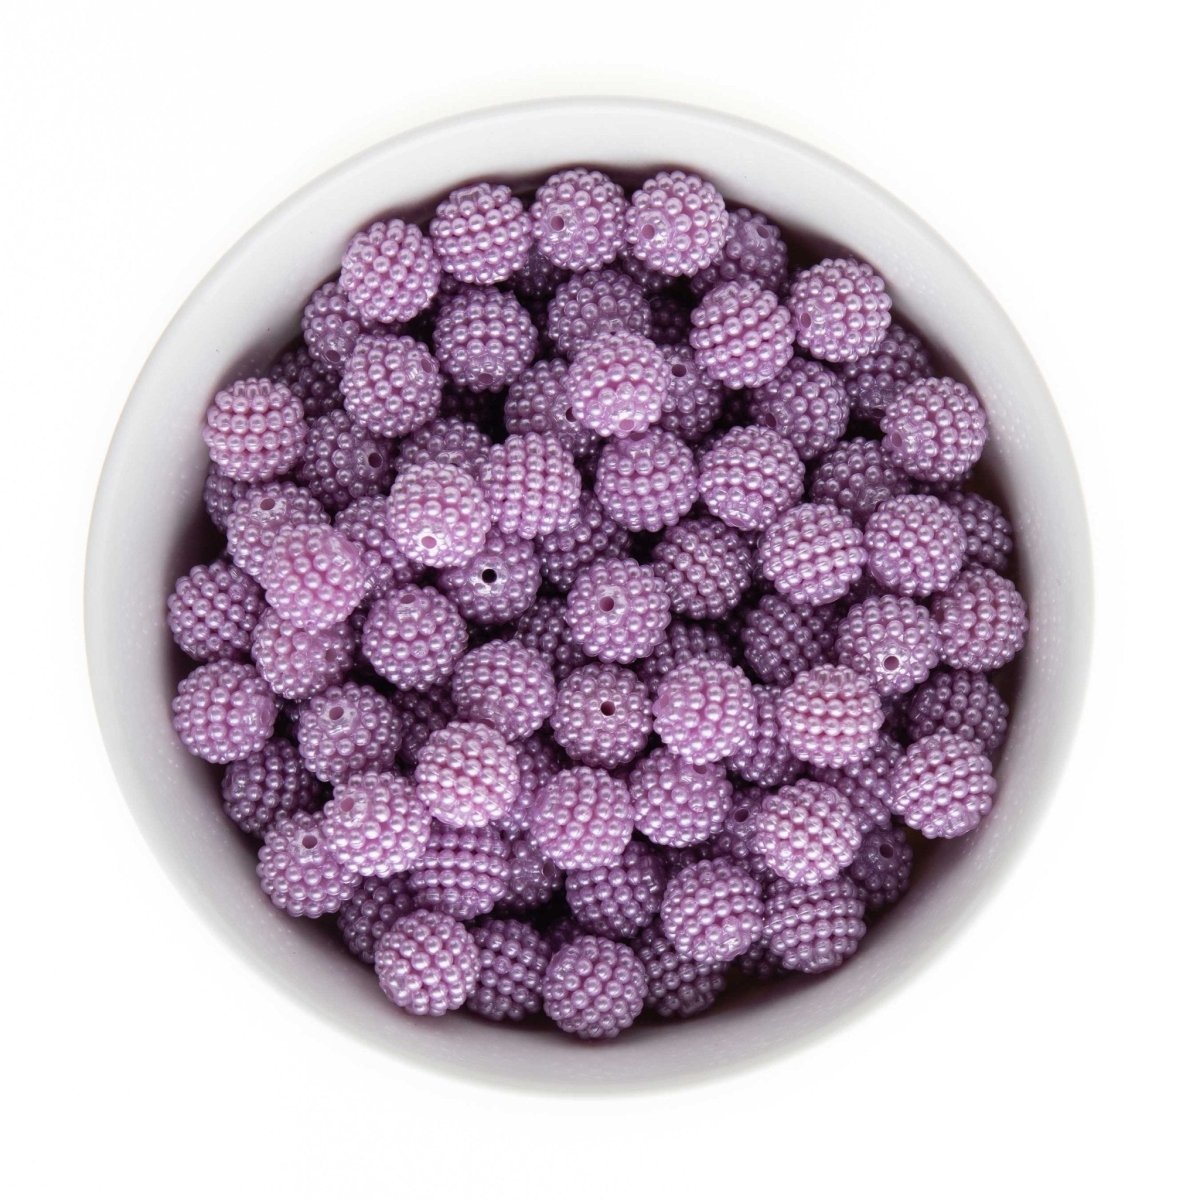 Acrylic Round Beads Pearl Berry Rhinestones Lilac from Cara & Co Craft Supply